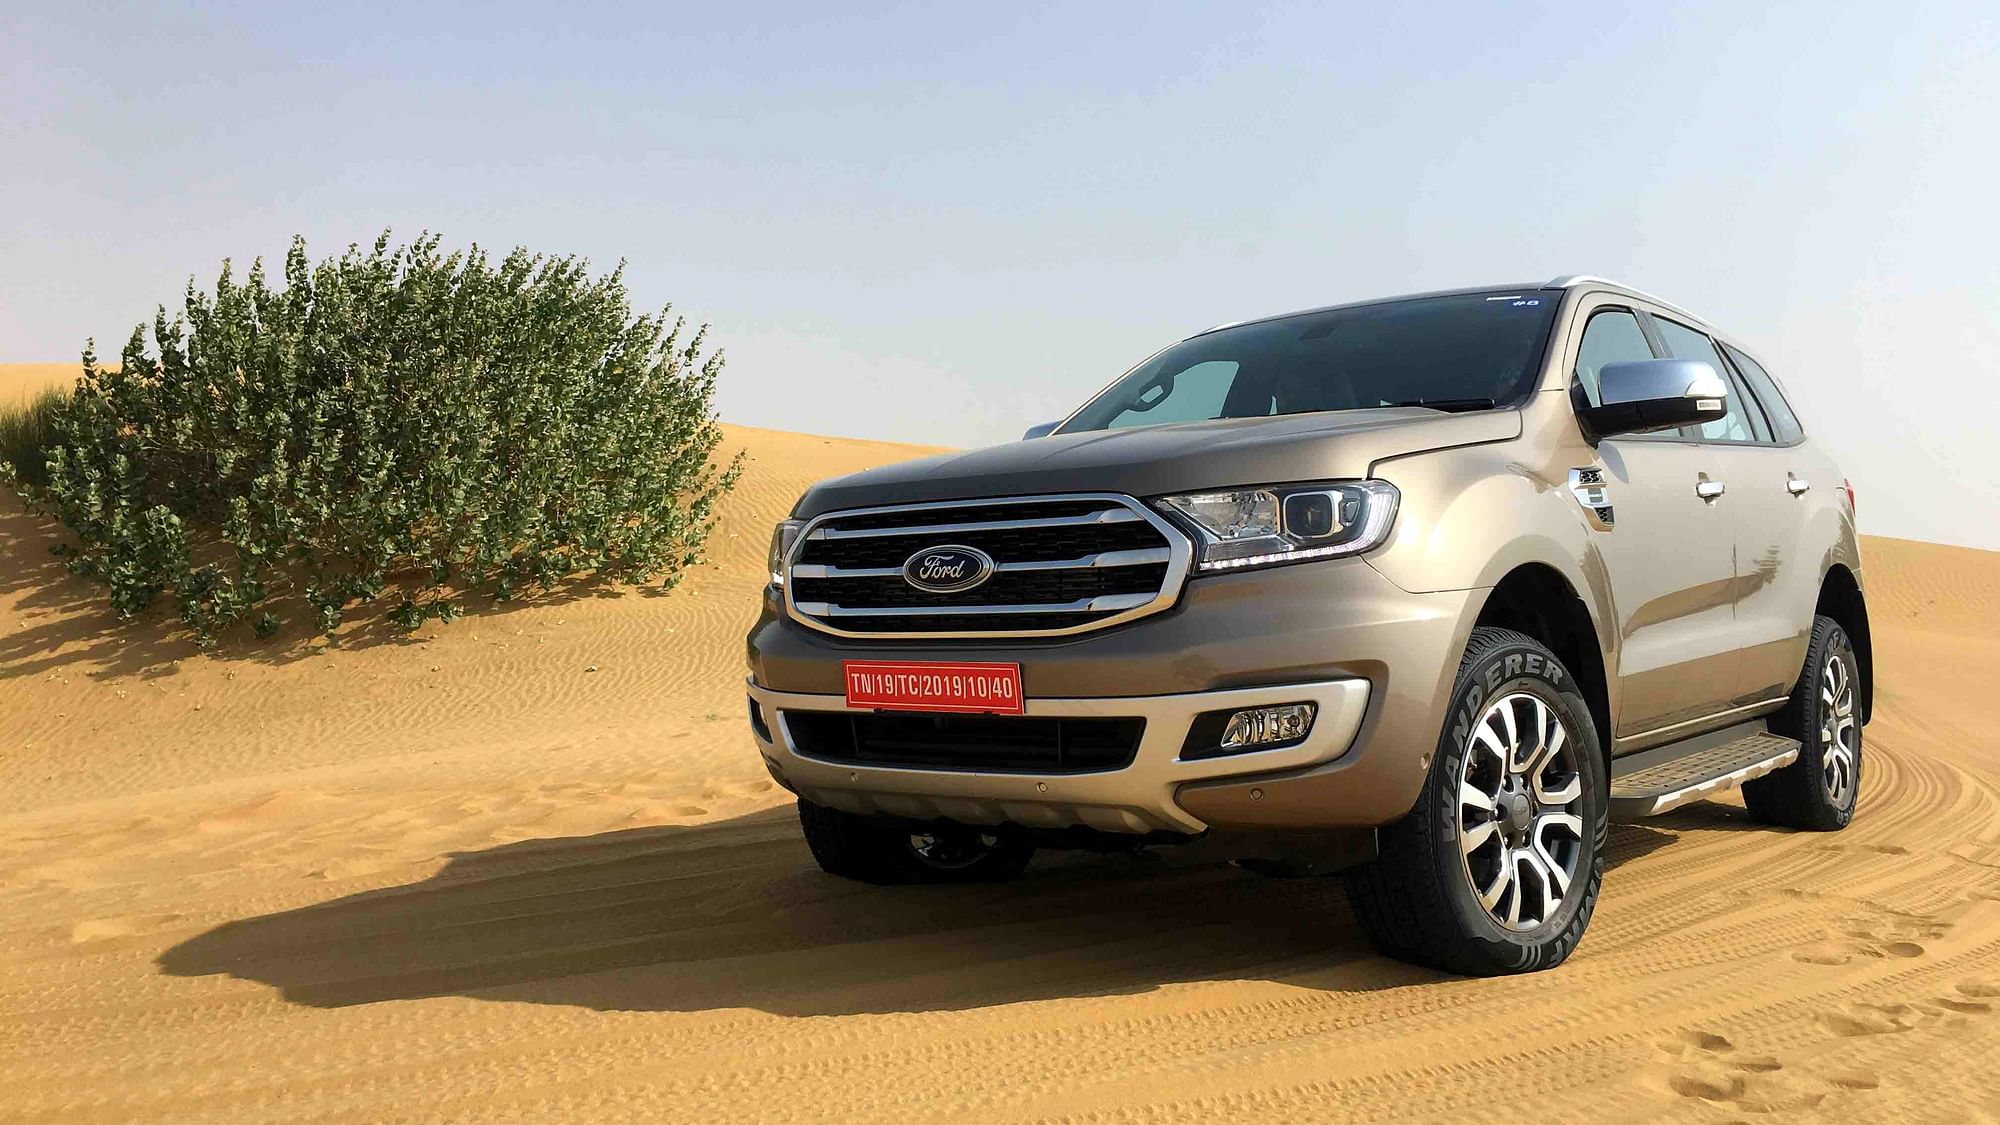 The Ford Endeavour gets a 2-litre diesel engine and a 10-speed automatic transmission.&nbsp;